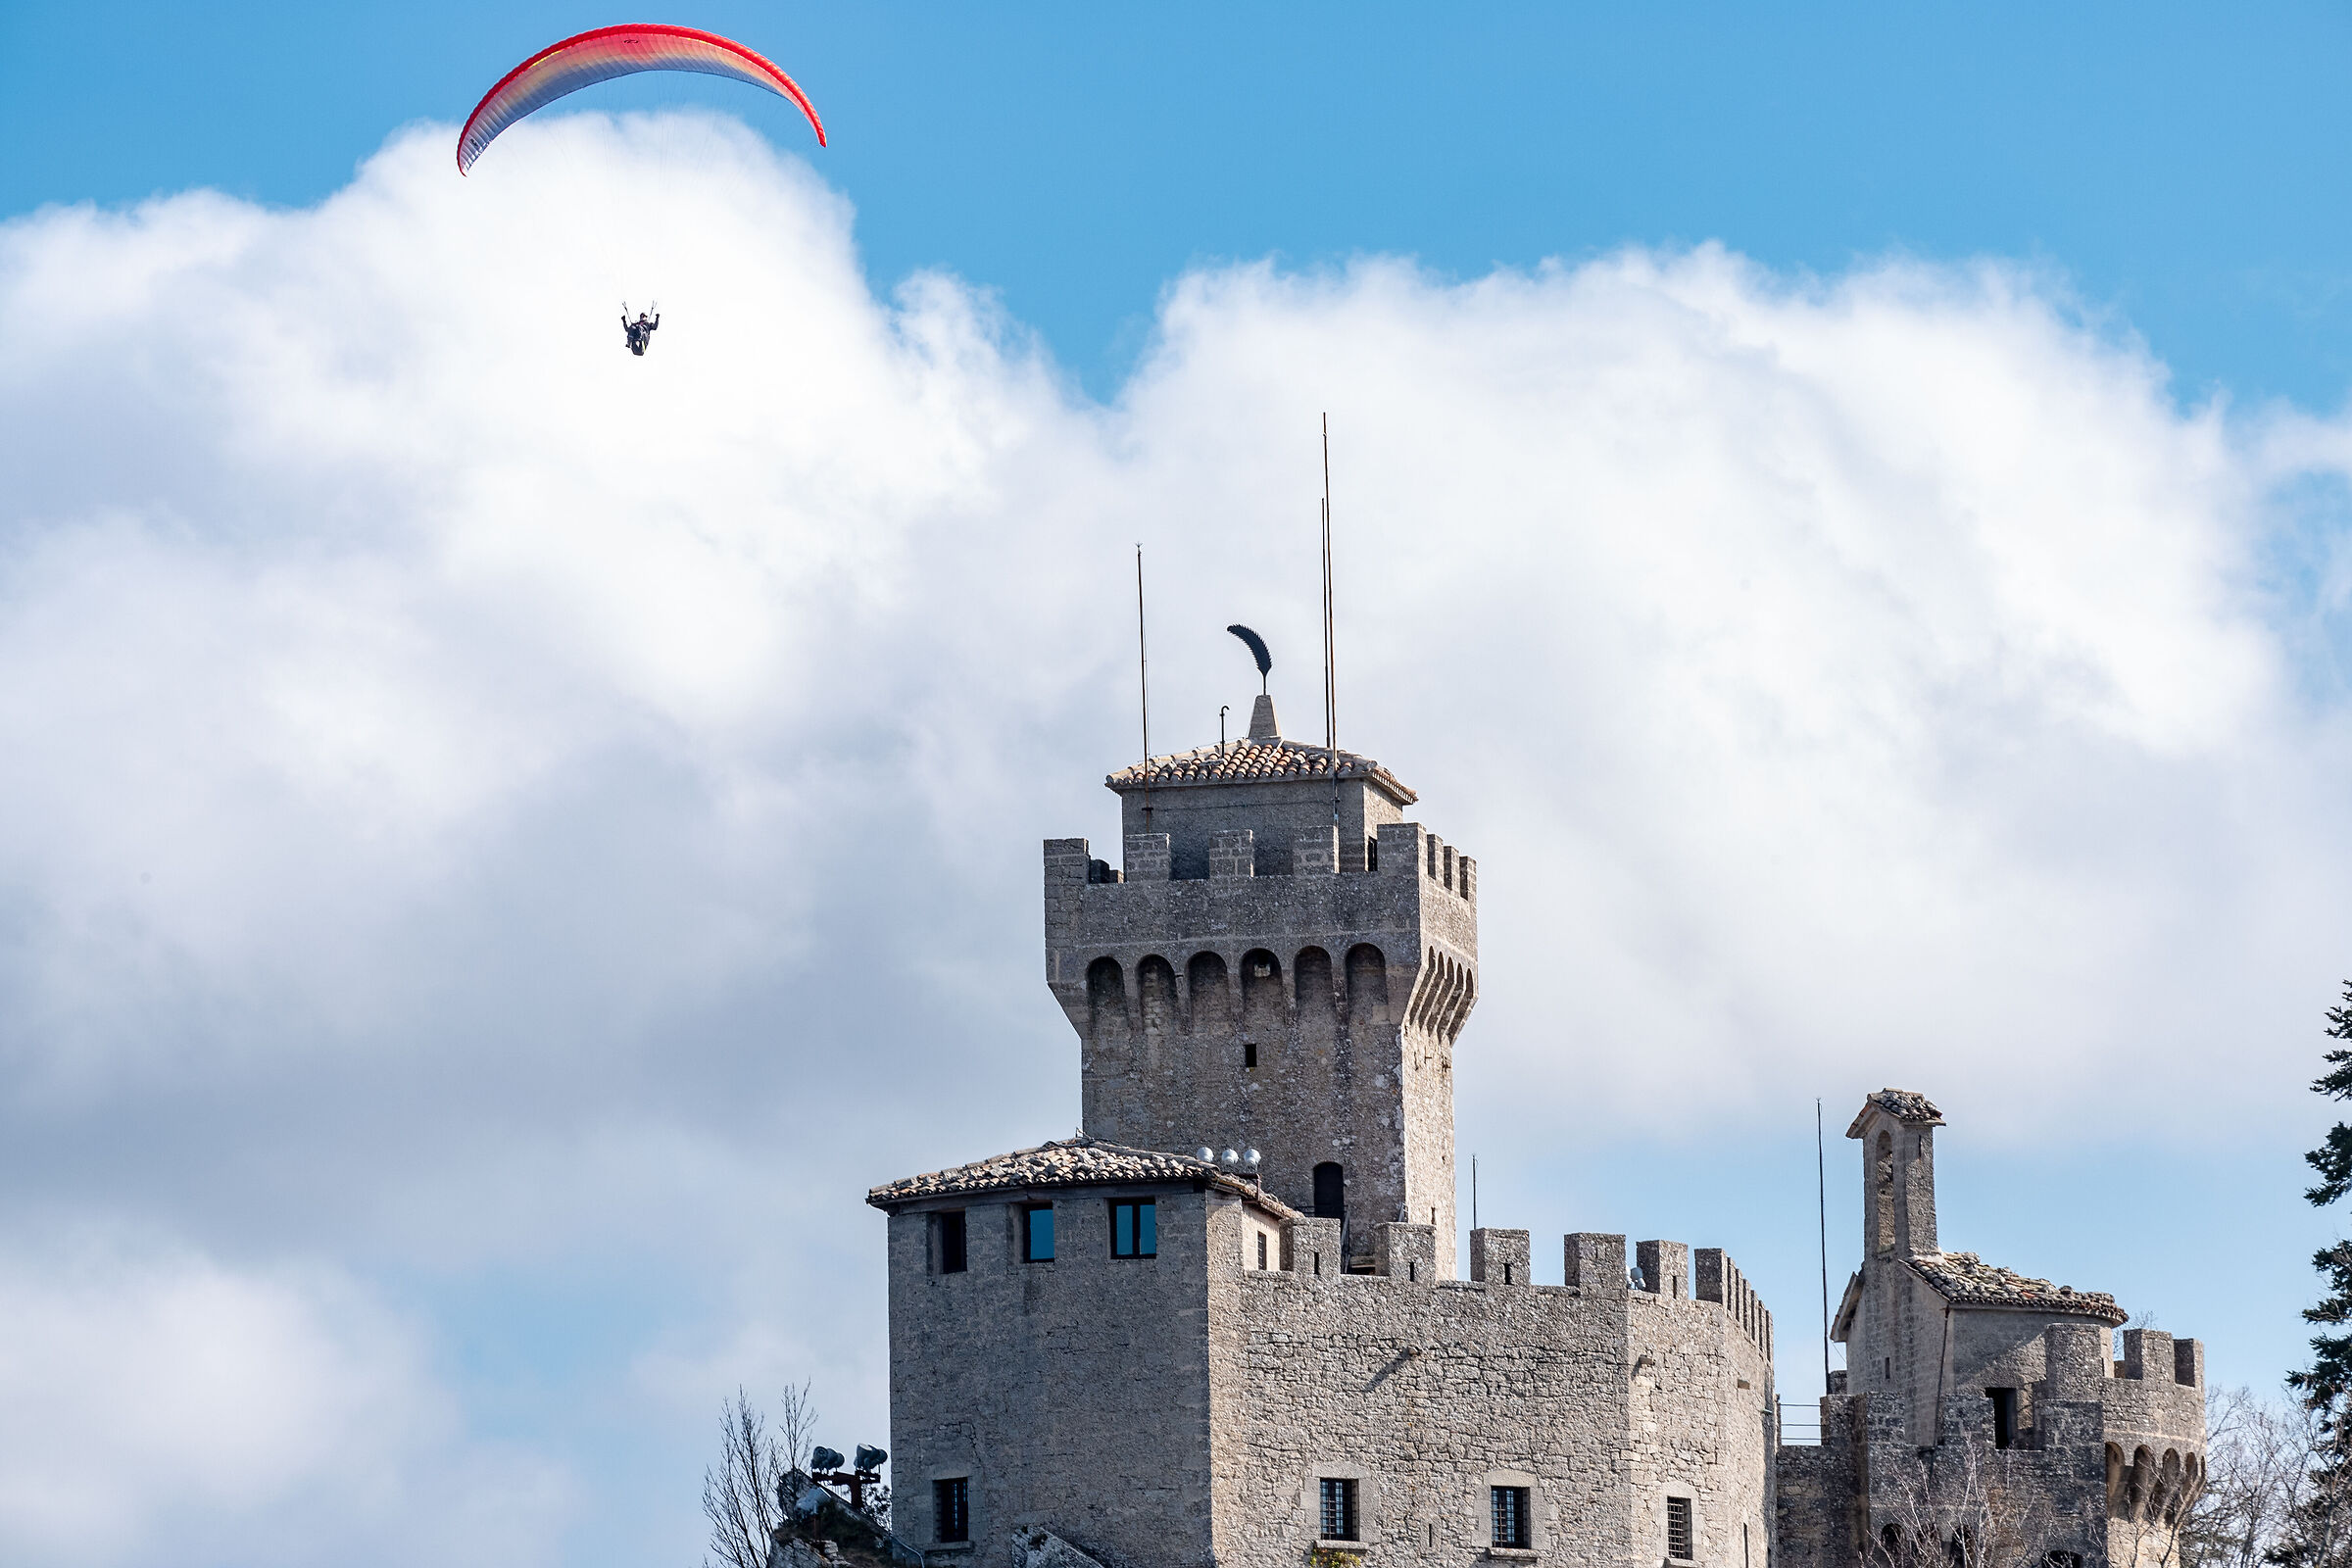 Flying over the roofs of the castle...